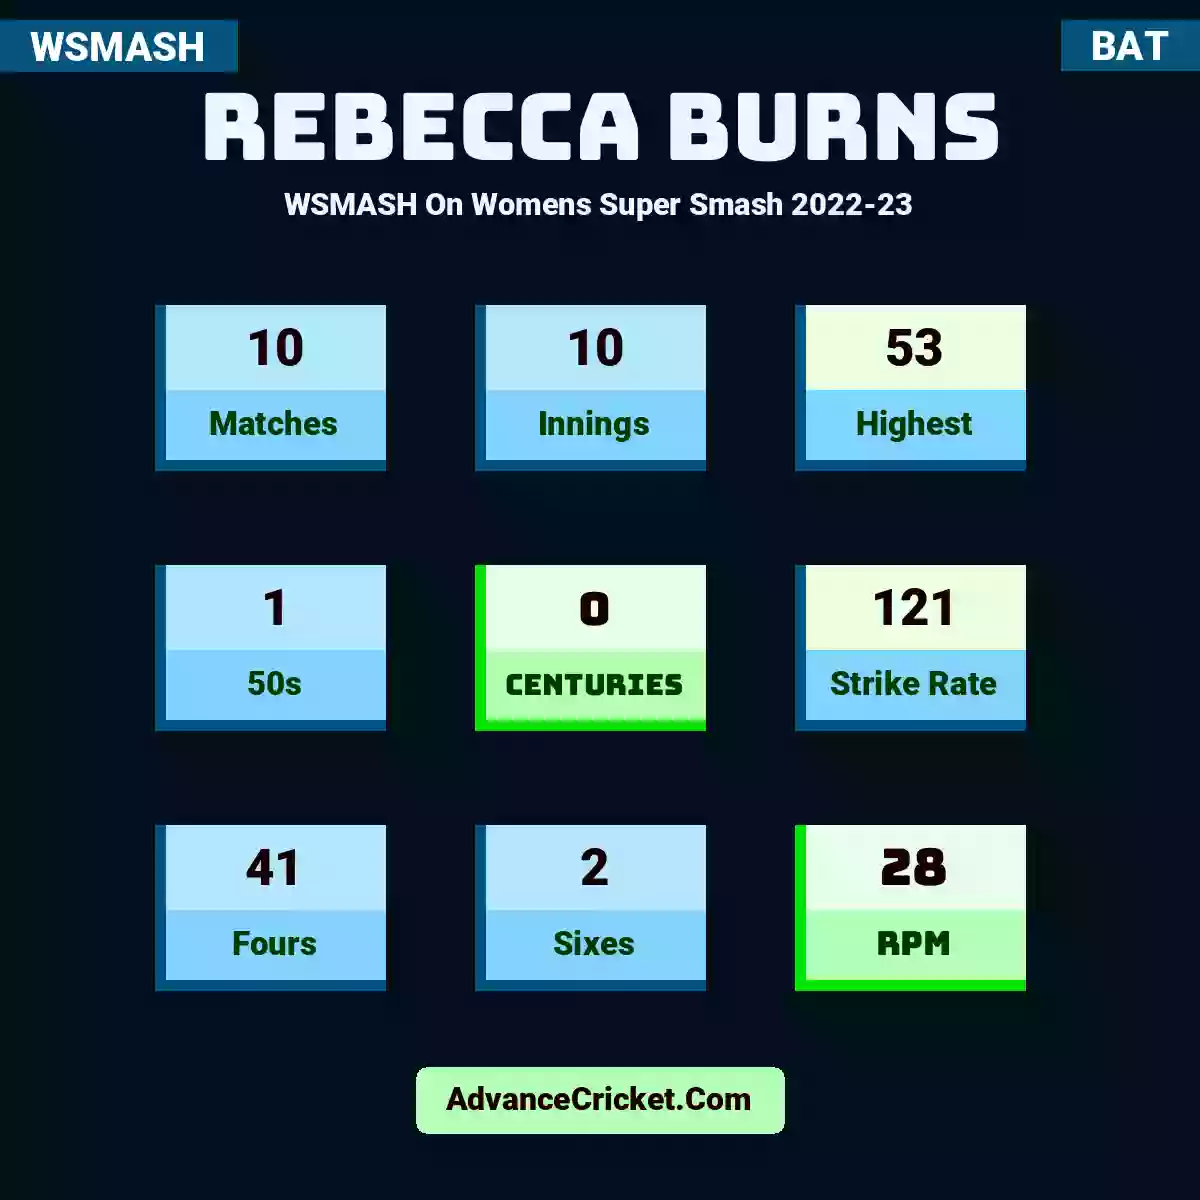 Rebecca Burns WSMASH  On Womens Super Smash 2022-23, Rebecca Burns played 10 matches, scored 53 runs as highest, 1 half-centuries, and 0 centuries, with a strike rate of 121. R.Burns hit 41 fours and 2 sixes, with an RPM of 28.